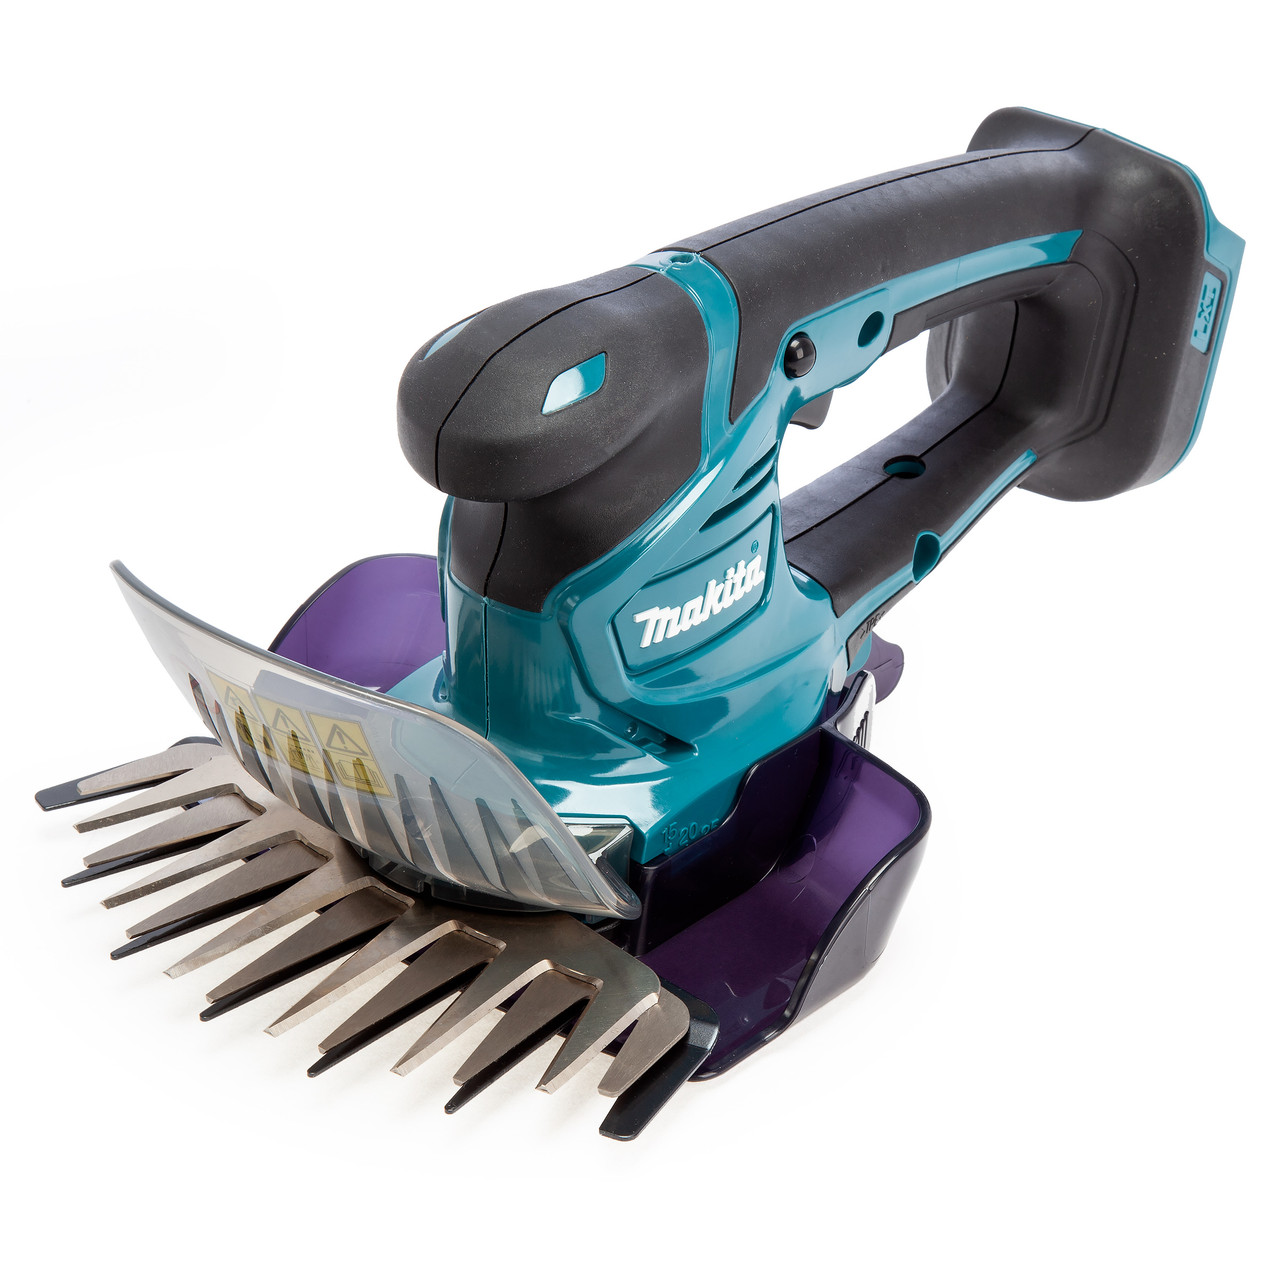 værksted Diskutere Troubled Makita DUM604ZX Grass Shears | Toolstop